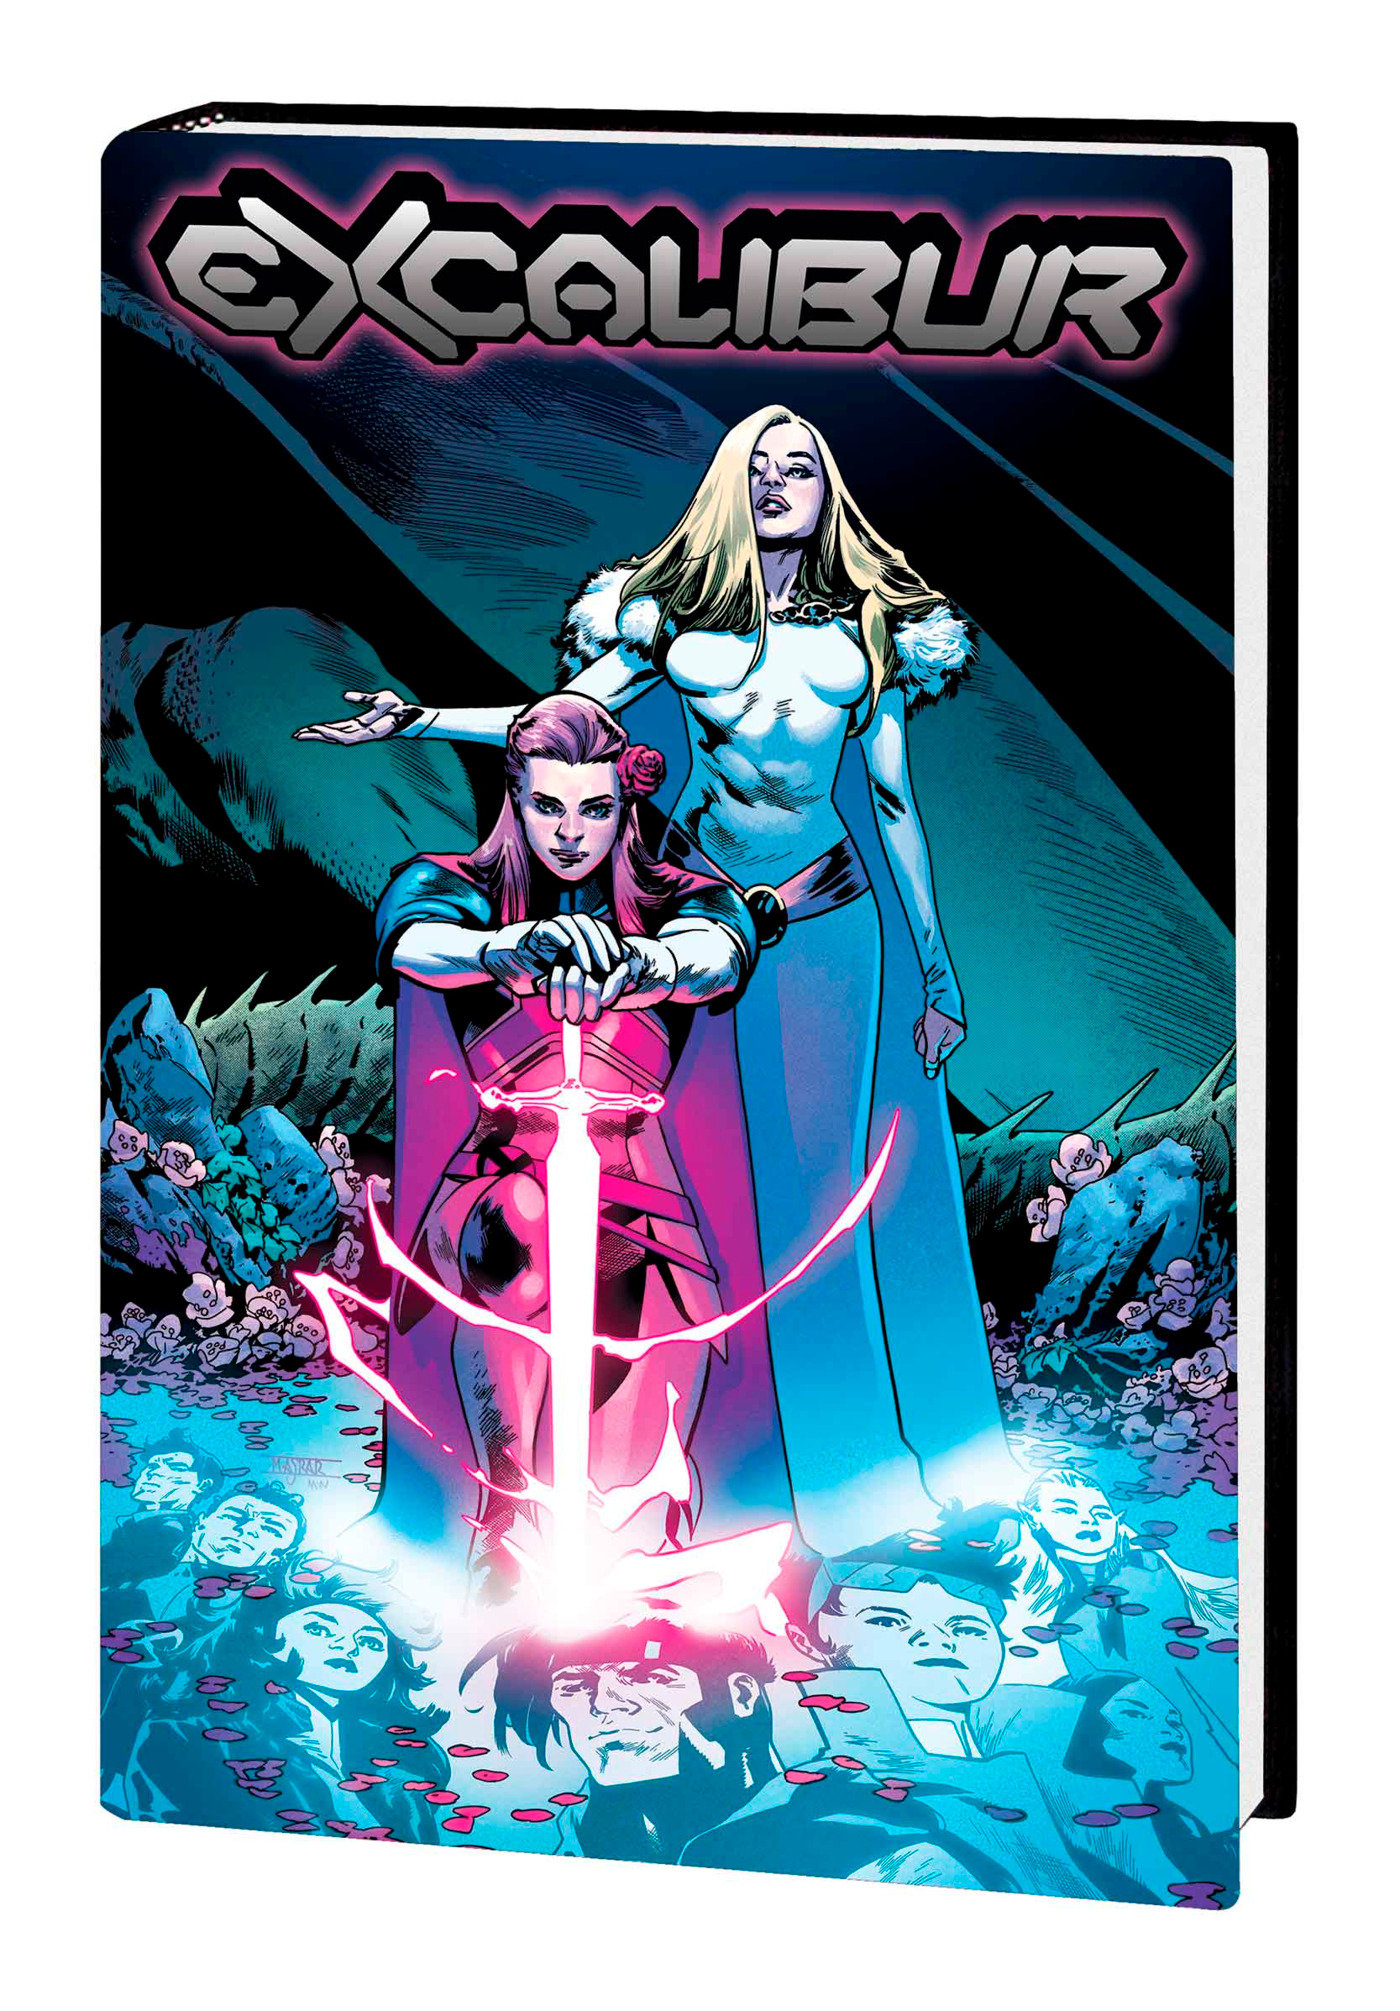 Excalibur by Tini Howard Hardcover Volume 2